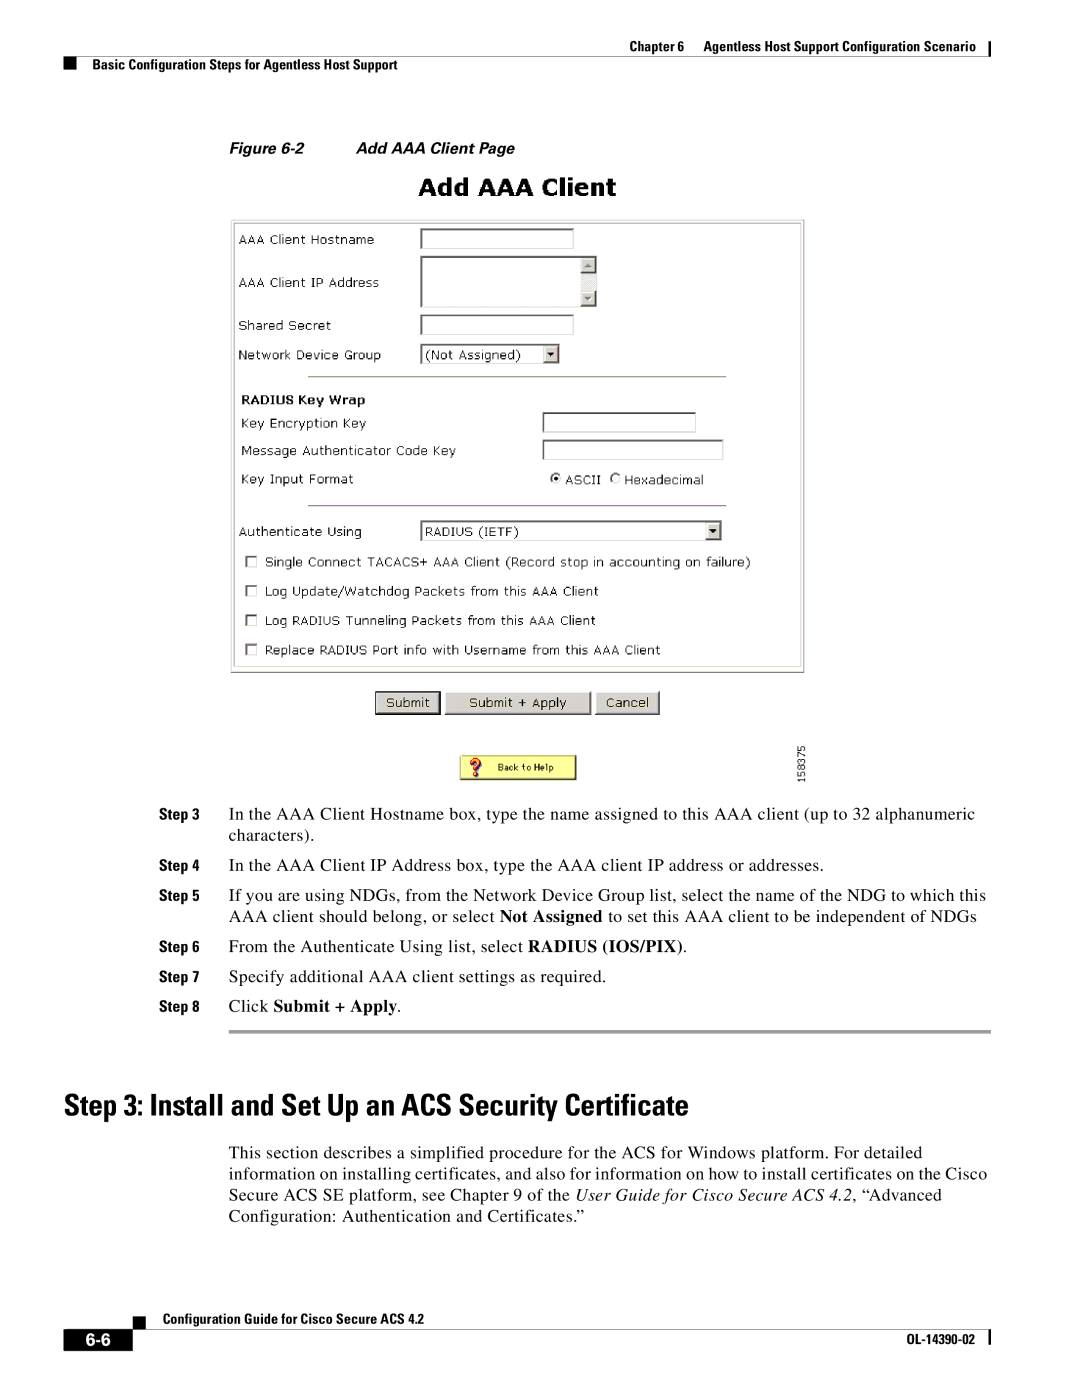 Cisco Systems 4.2 manual Install and Set Up an ACS Security Certificate, Click Submit + Apply 